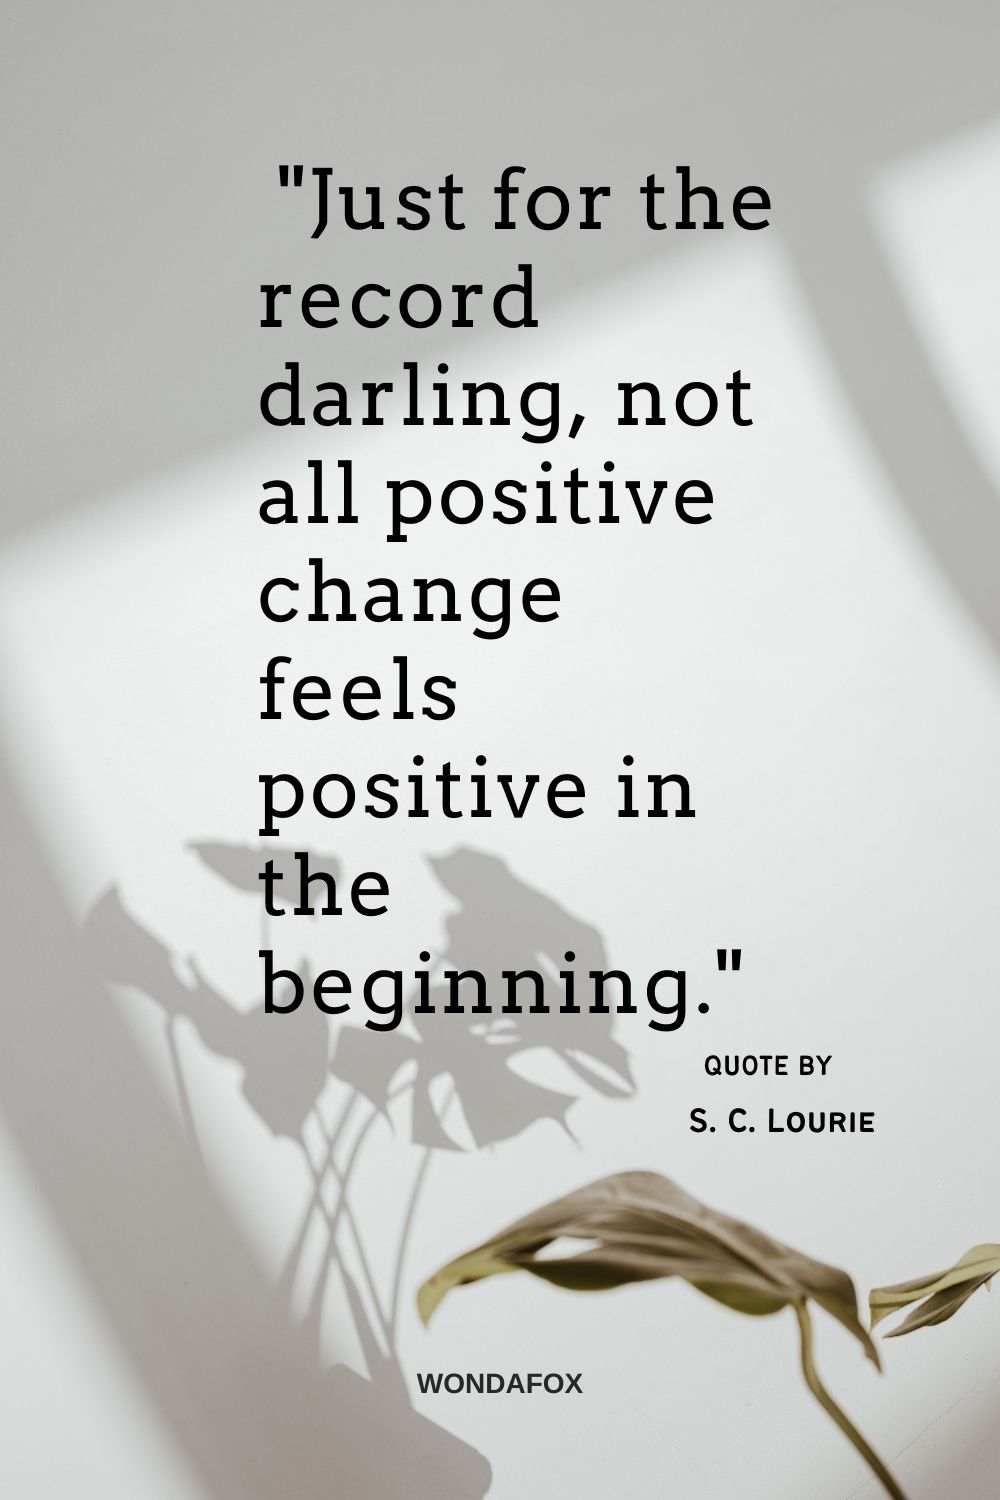  "Just for the record darling, not all positive change feels positive in the beginning." 
S. C. Lourie